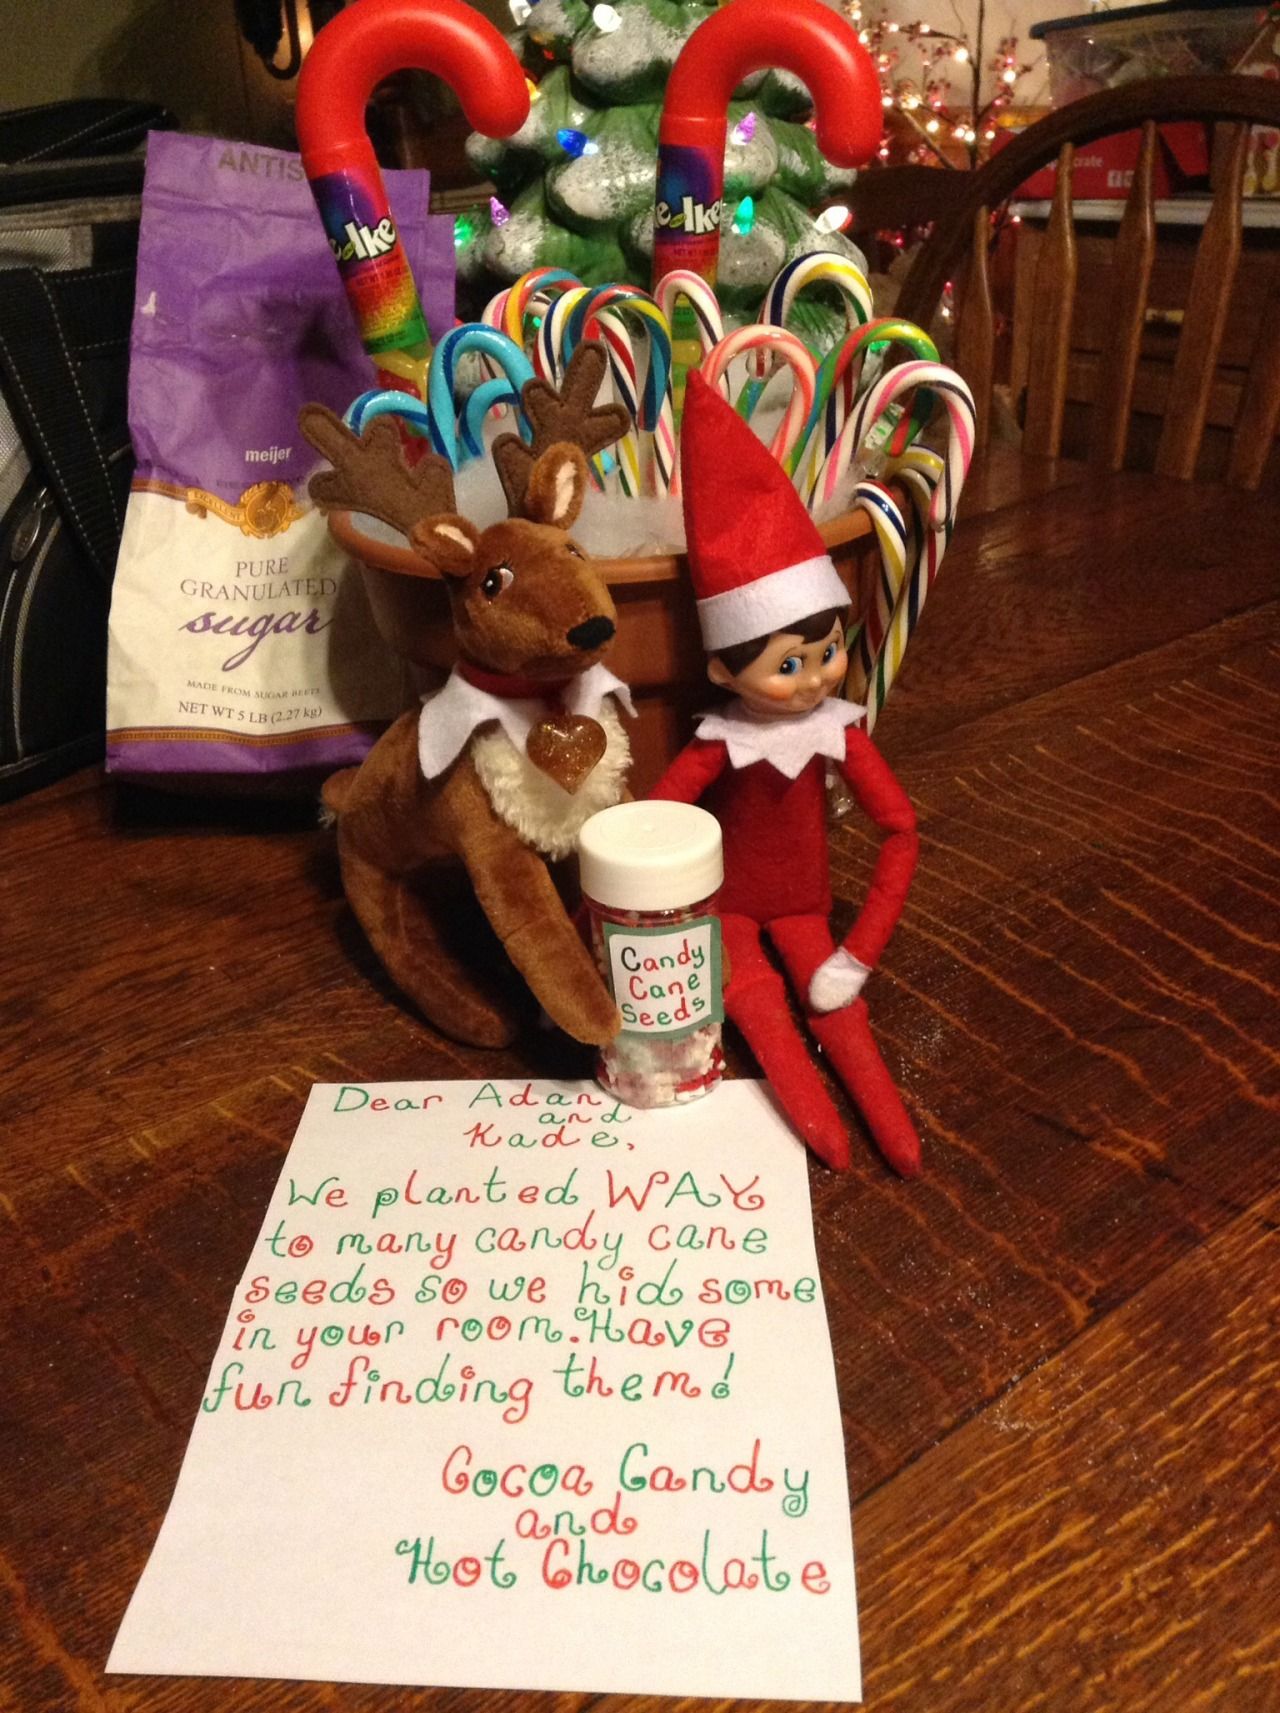 Elf on the Shelf Candy Cane Seeds The Elf, Cocoa, and his reindeer ...